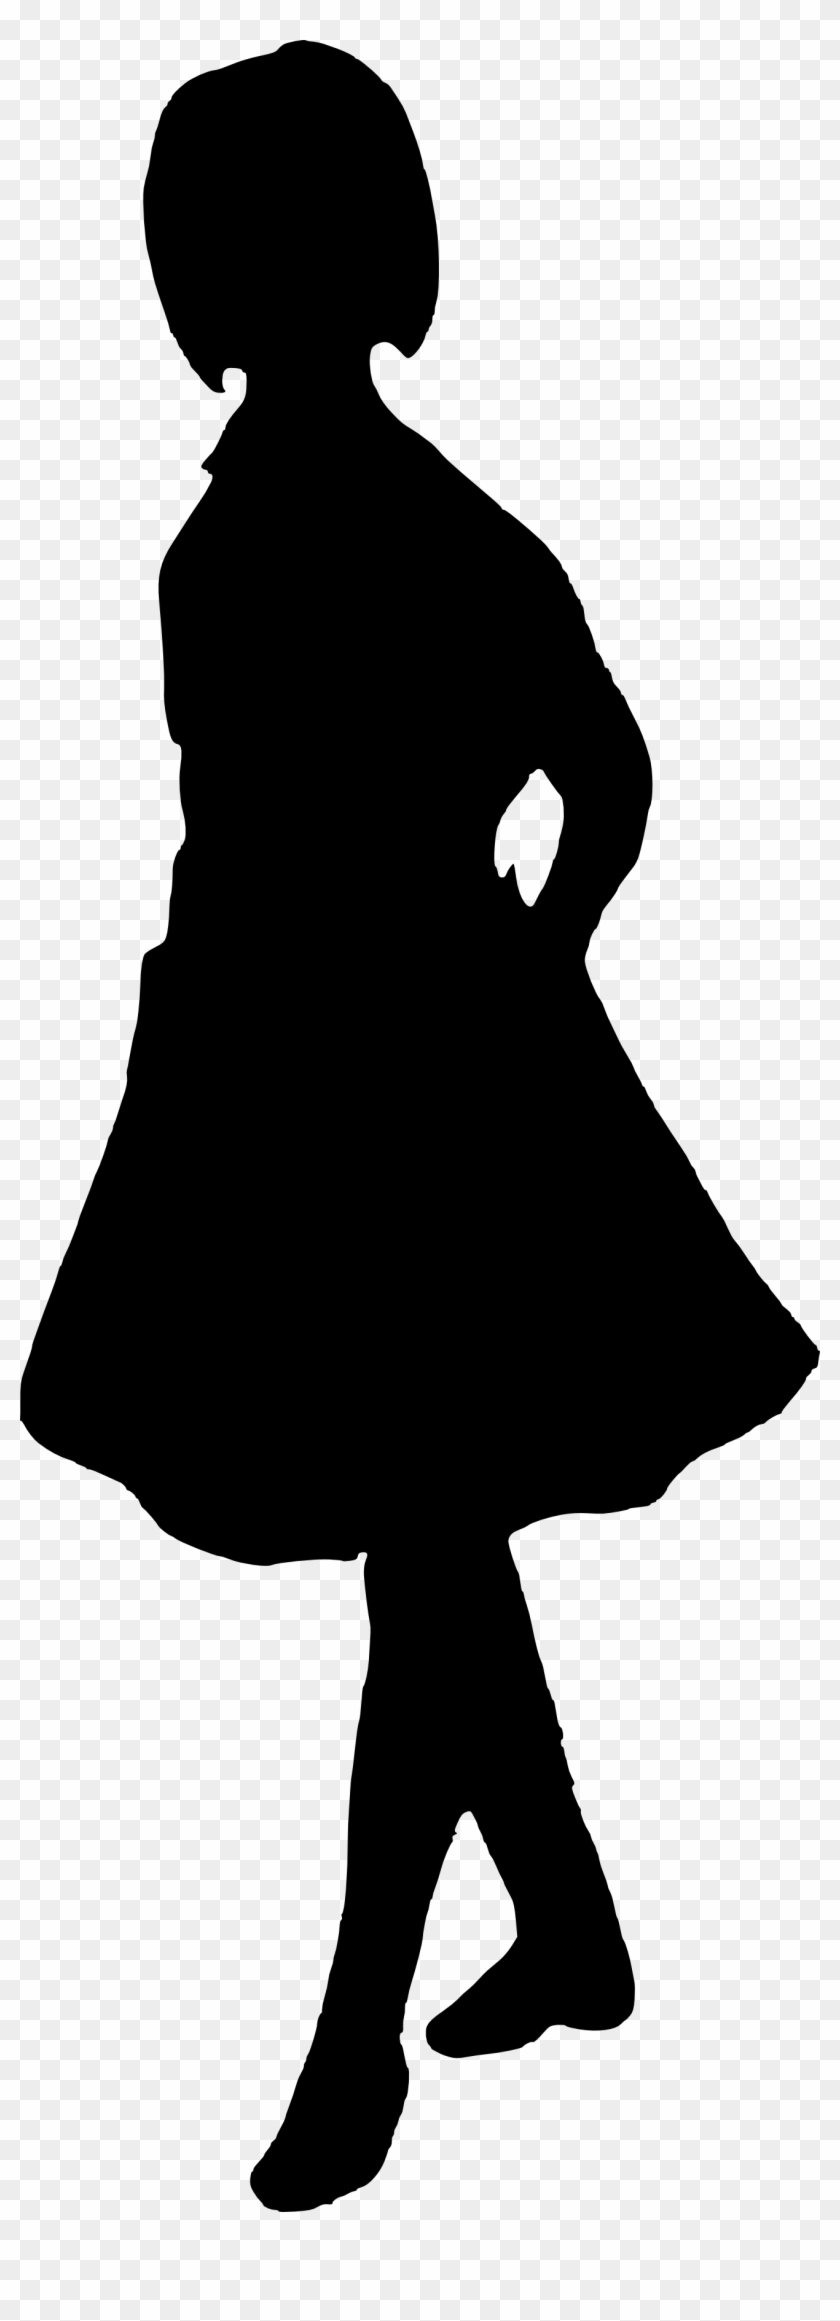 Free Download - Girl Silhouette #705526